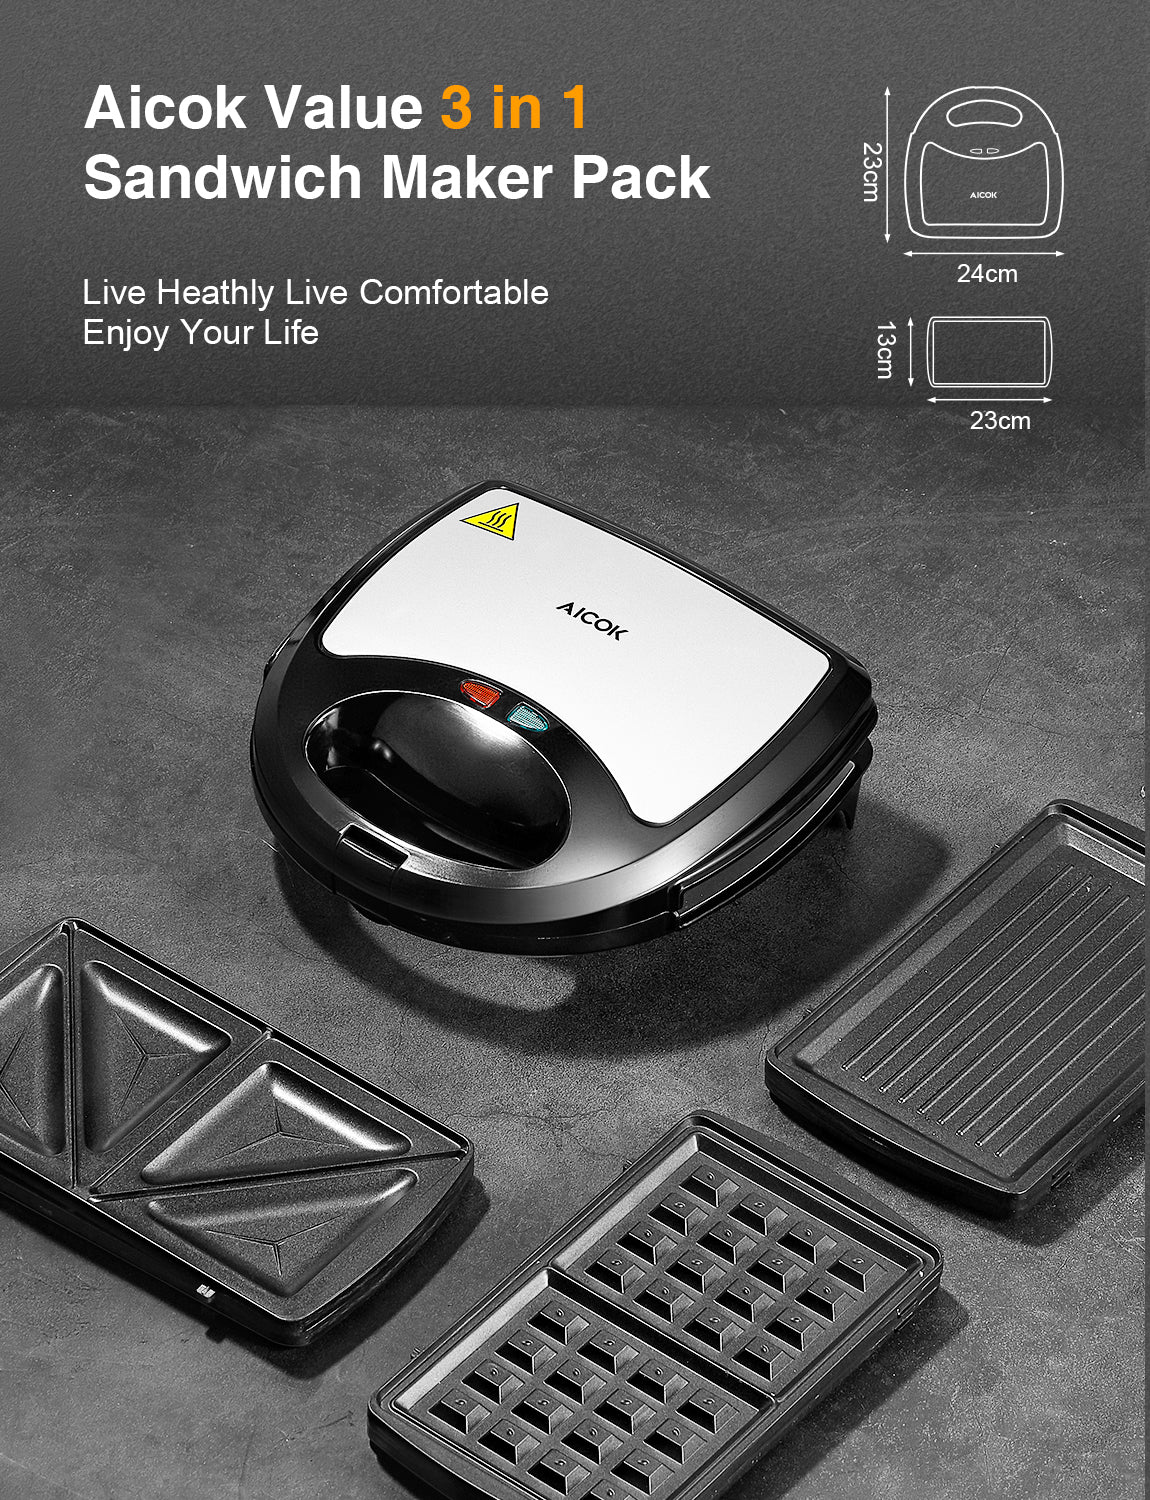 Sandwich Maker, Waffle Maker, Electric Panini Press Grill, 3-in-1 Detachable Non-Stick Plates, LED Indicator Lights, Cool Touch Handle, Anti-Skid Feet, Easy to Clean & Dishwasher Safe, Compact and Portable